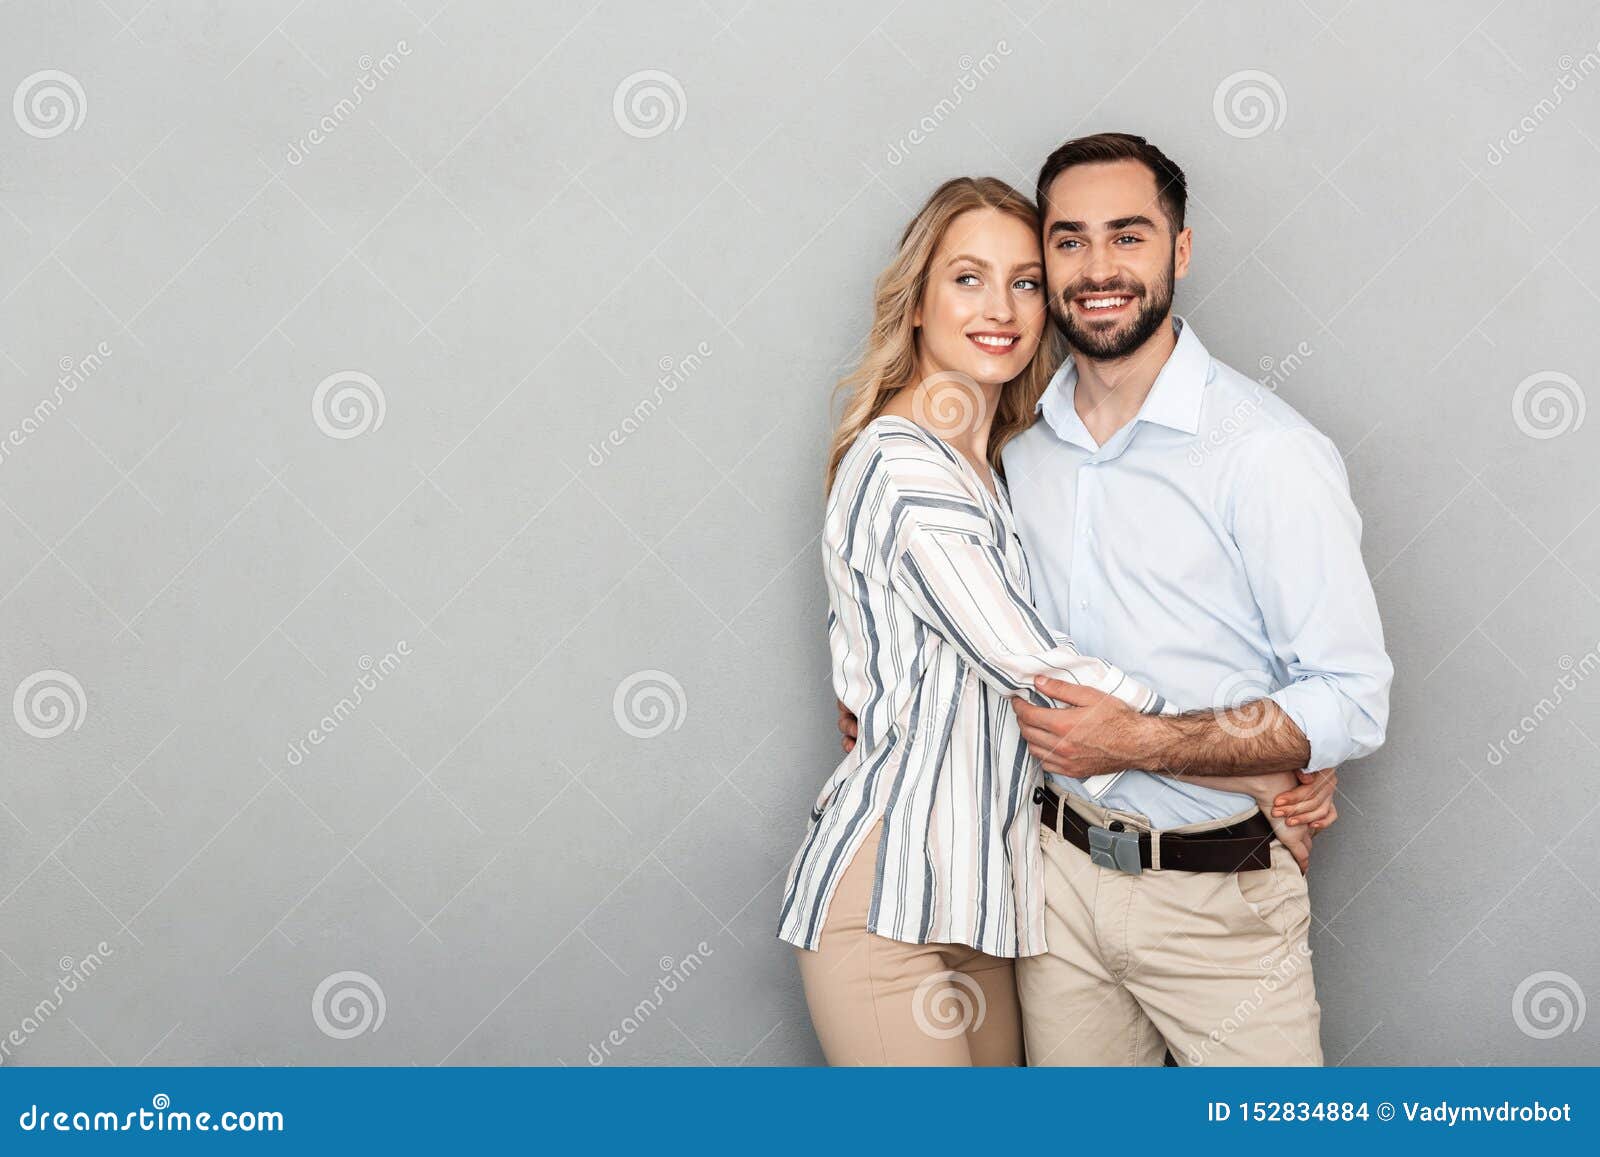 https://thumbs.dreamstime.com/z/photo-european-couple-casual-clothing-smiling-hugging-each-other-isolated-over-gray-background-152834884.jpg